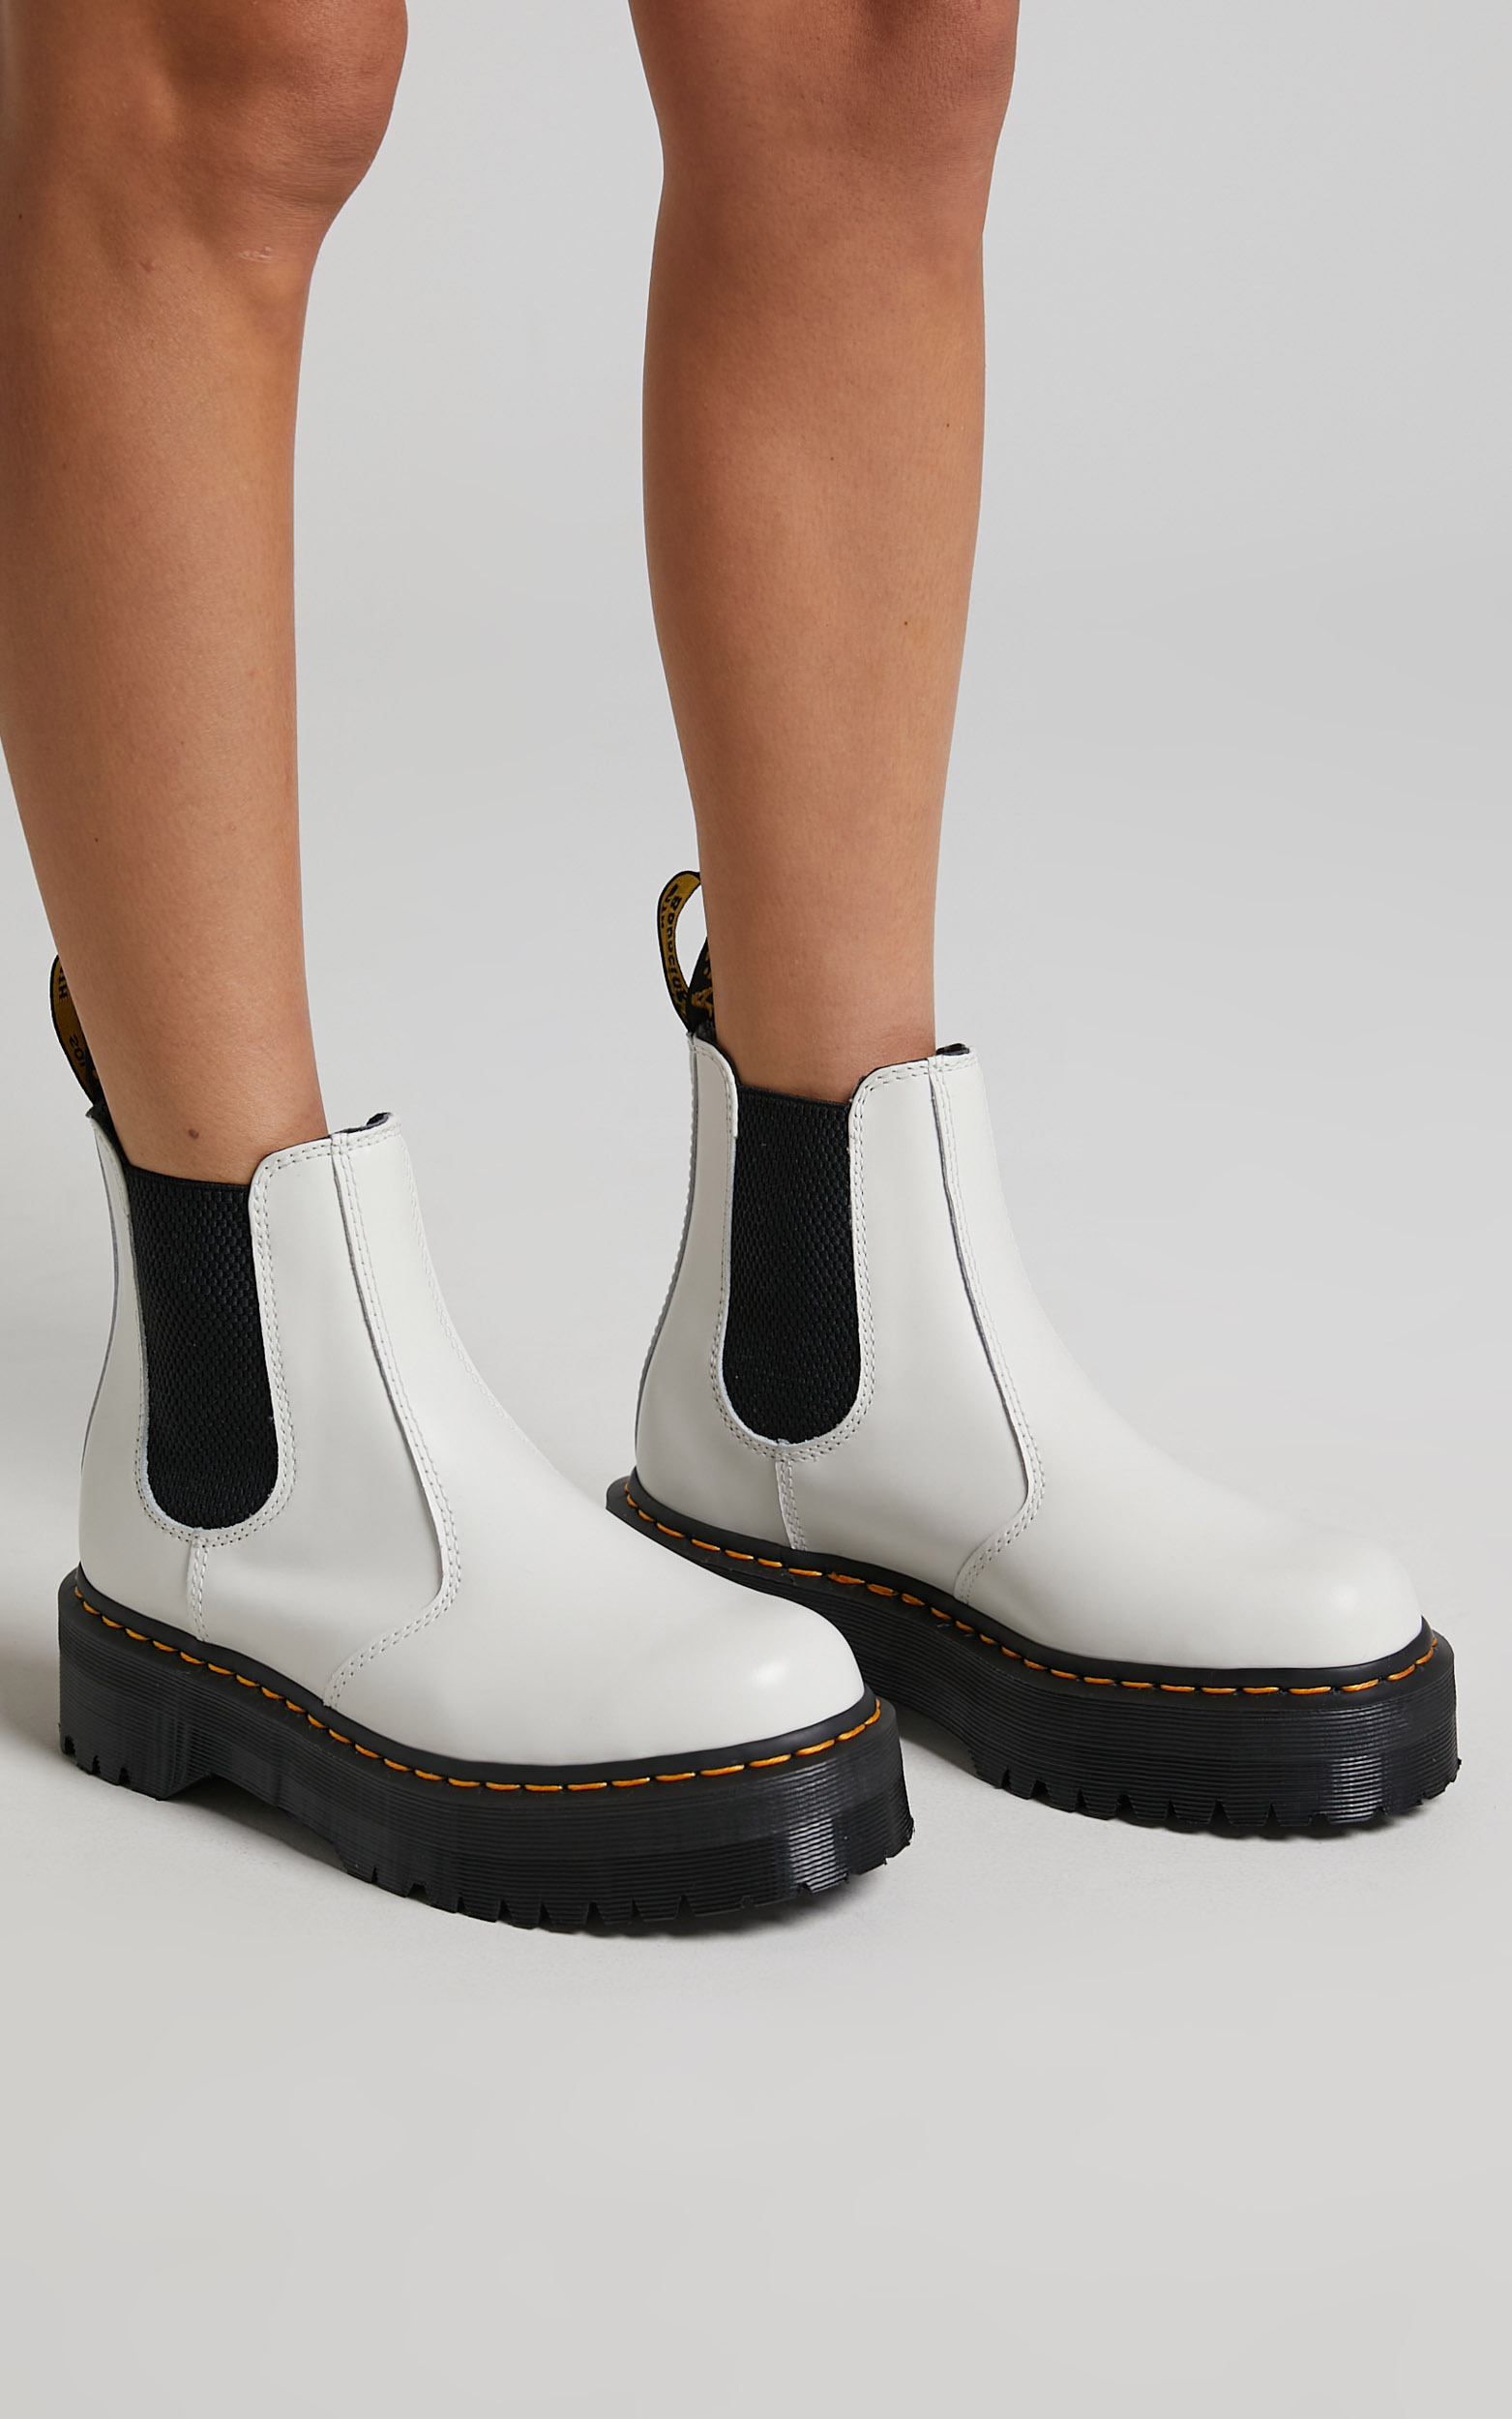 Dr. Martens - 2976 Quad Chelsea Boot in White Smooth - 05, WHT1, hi-res image number null